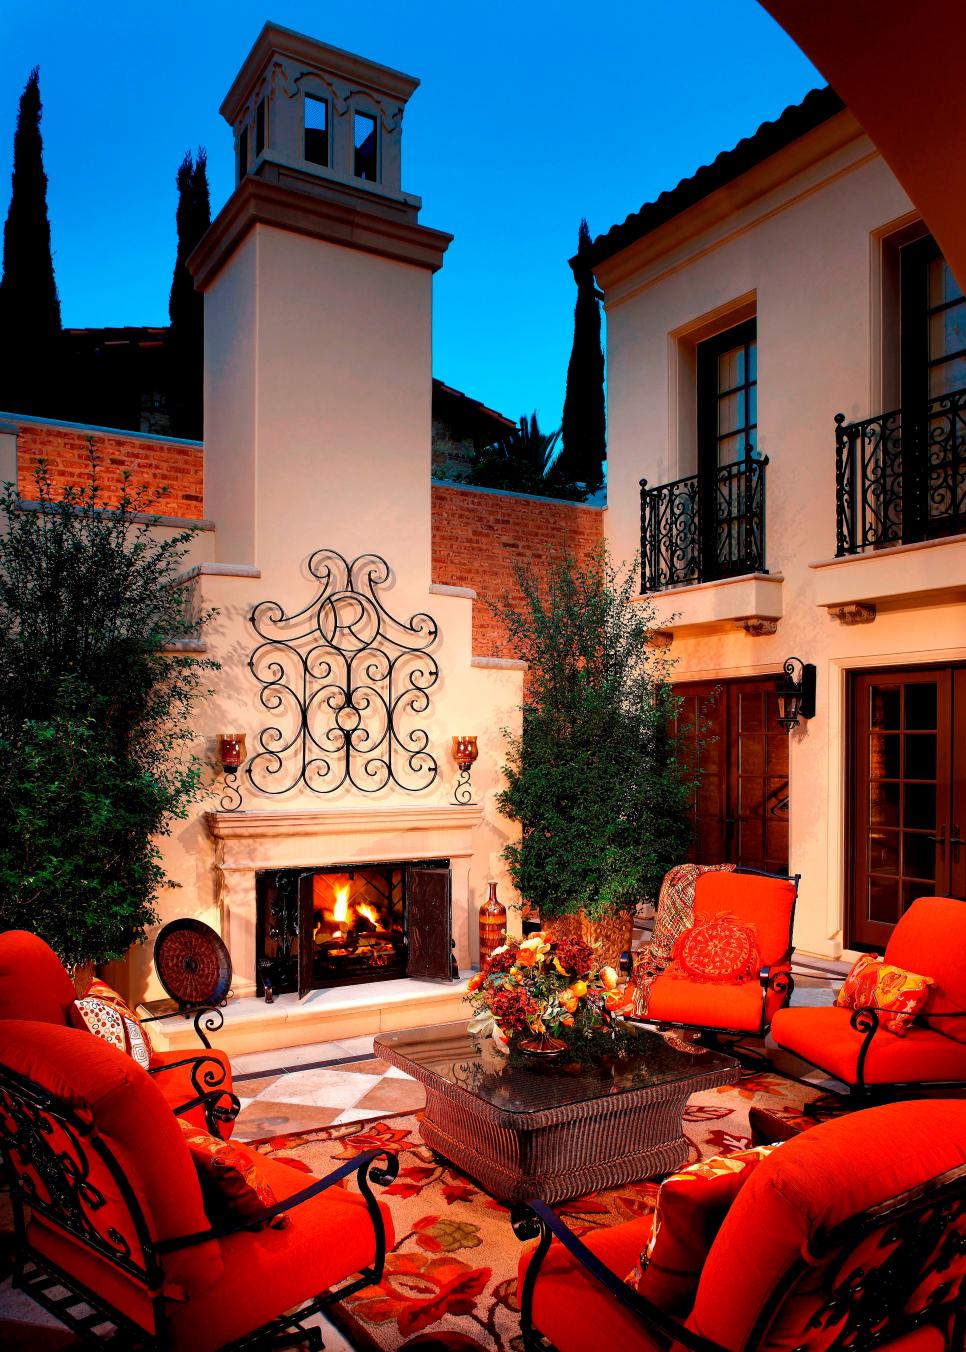 Mediterranean Outdoor Sitting Area With Stucco Fireplace | HGTV